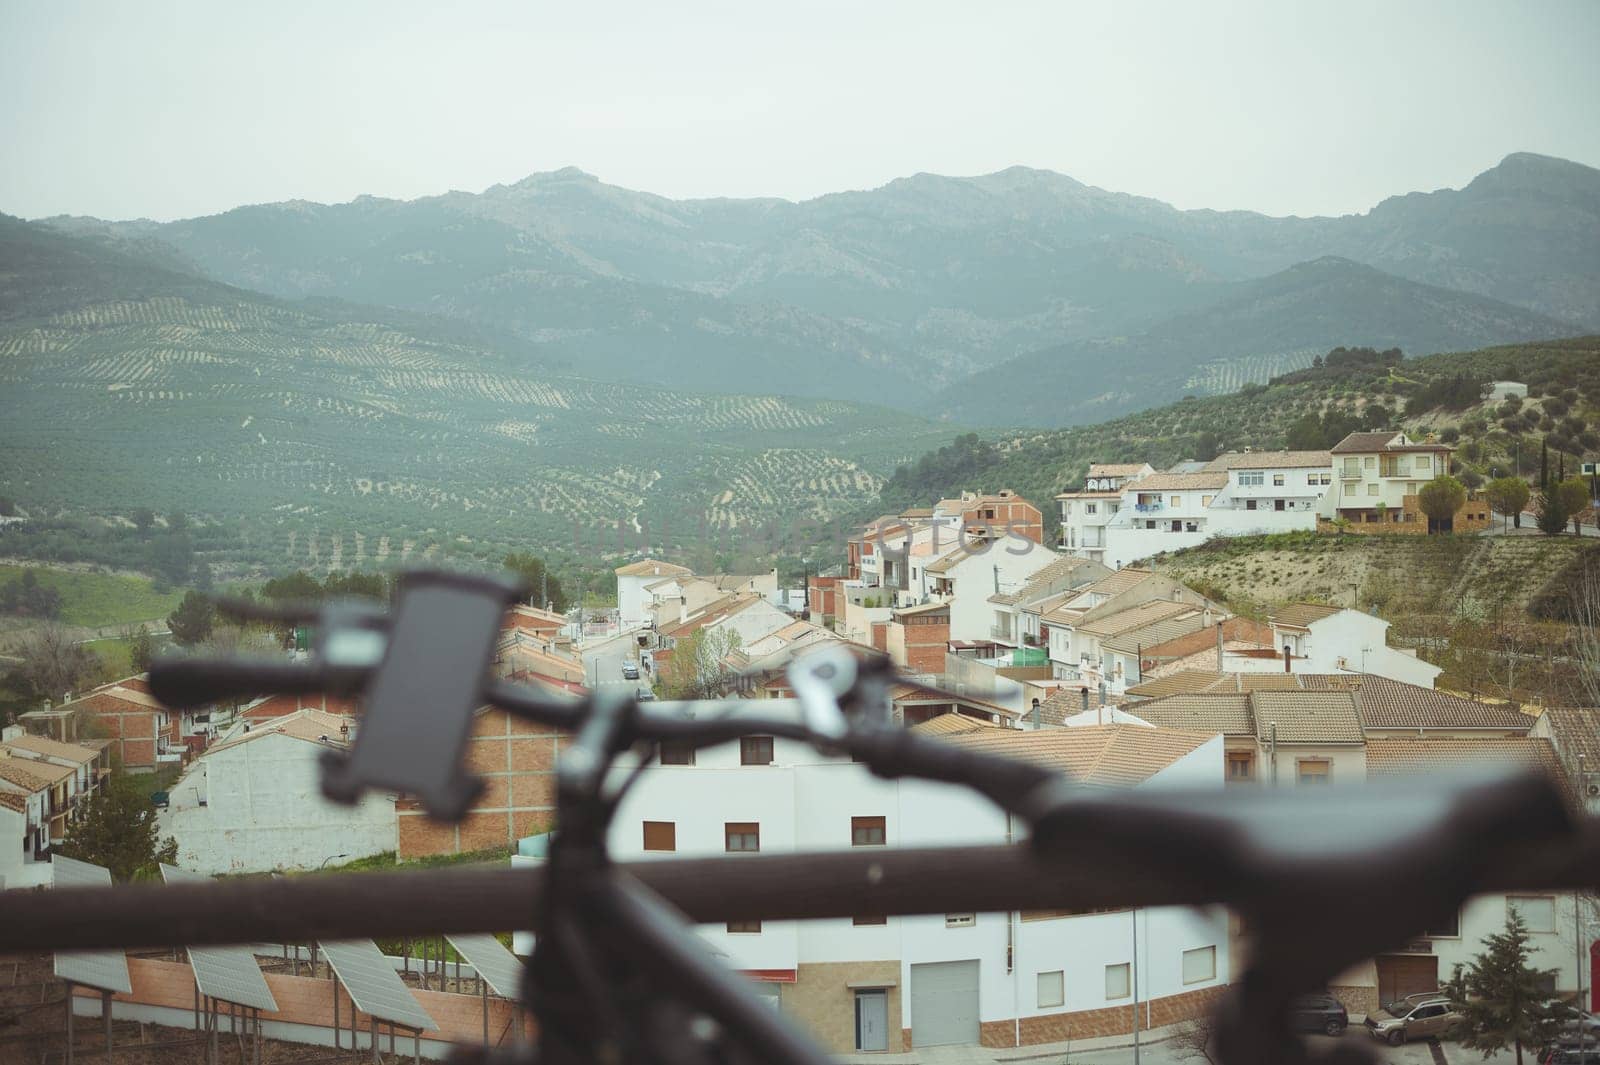 View through a blurred handlebar of an electric motor bike to a beautiful city or medieval village in mountains in Spain. E-bicycle - eco friendly mode of transportation. Bike sharing city service by artgf